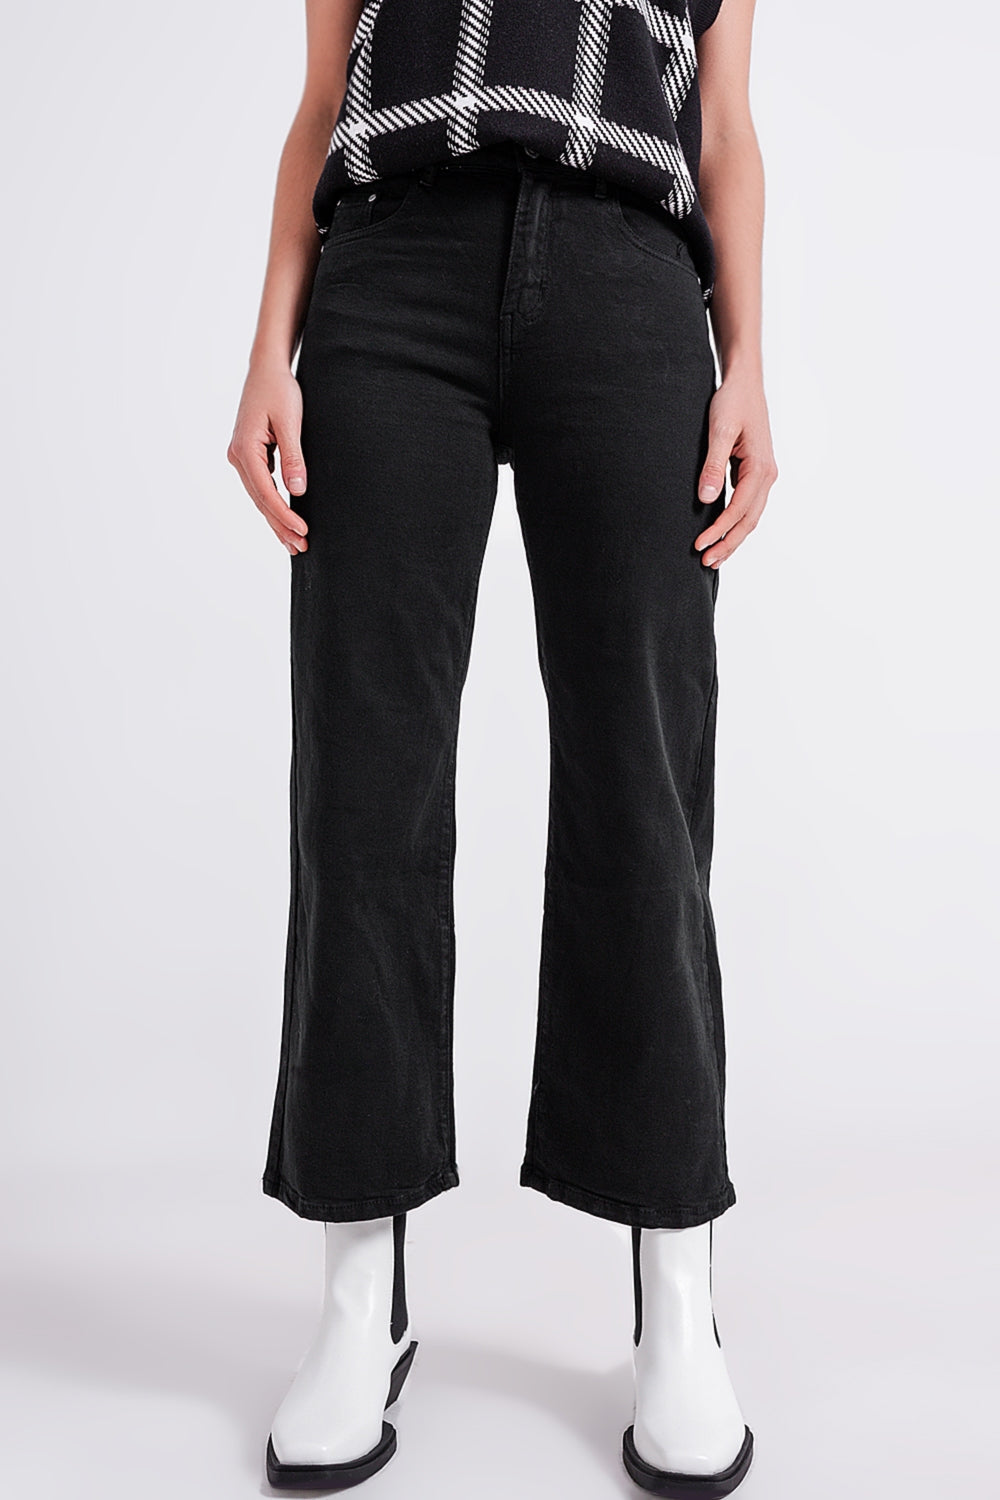 Q2 Cropped wide leg jeans in black